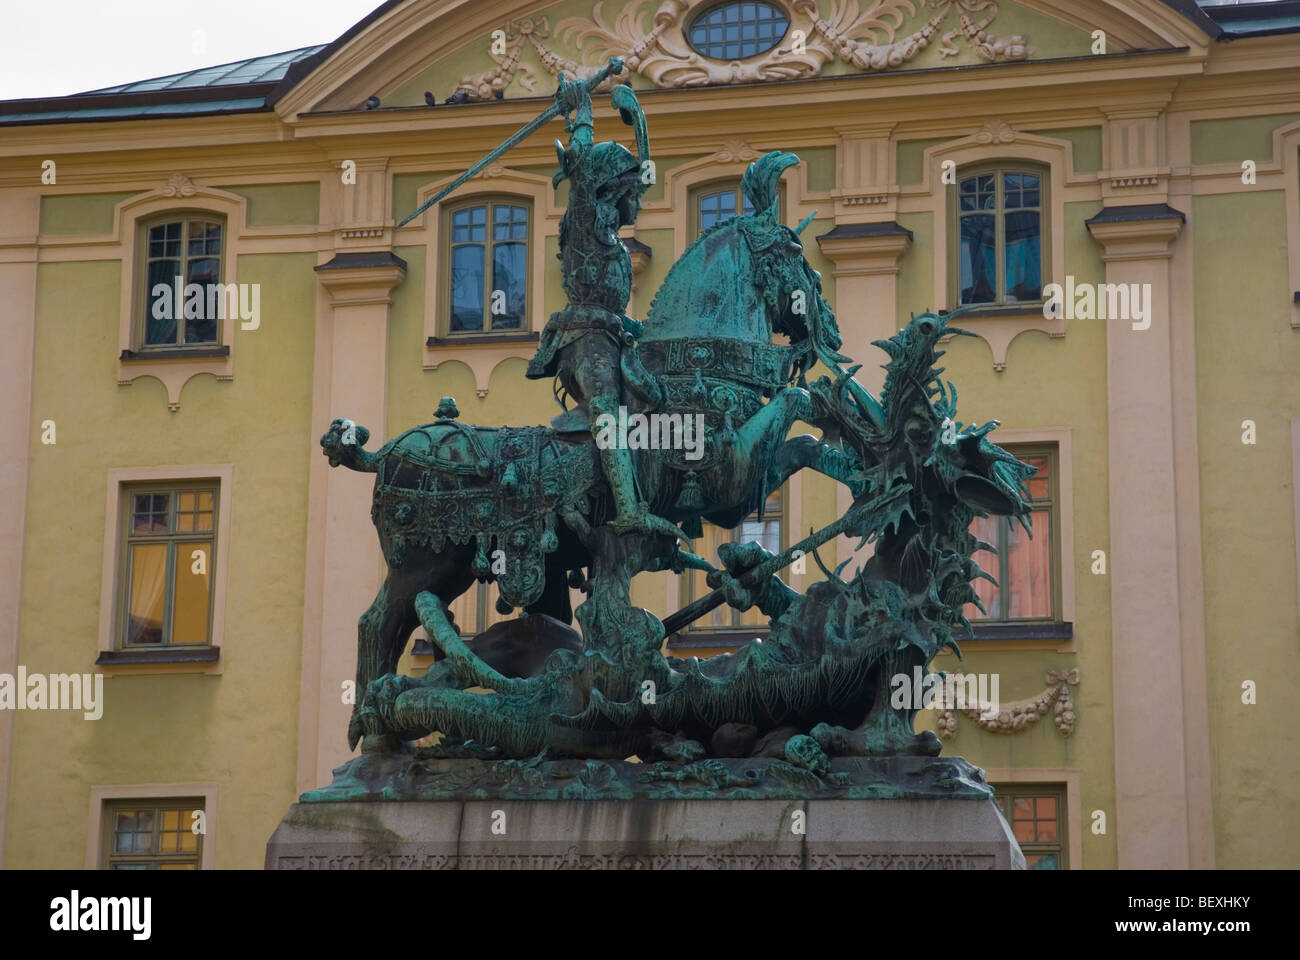 Statue of St George and Dragon at K pmantorget in Gamla Stan the old town of Stockholm Sweden Europe Stock Photo